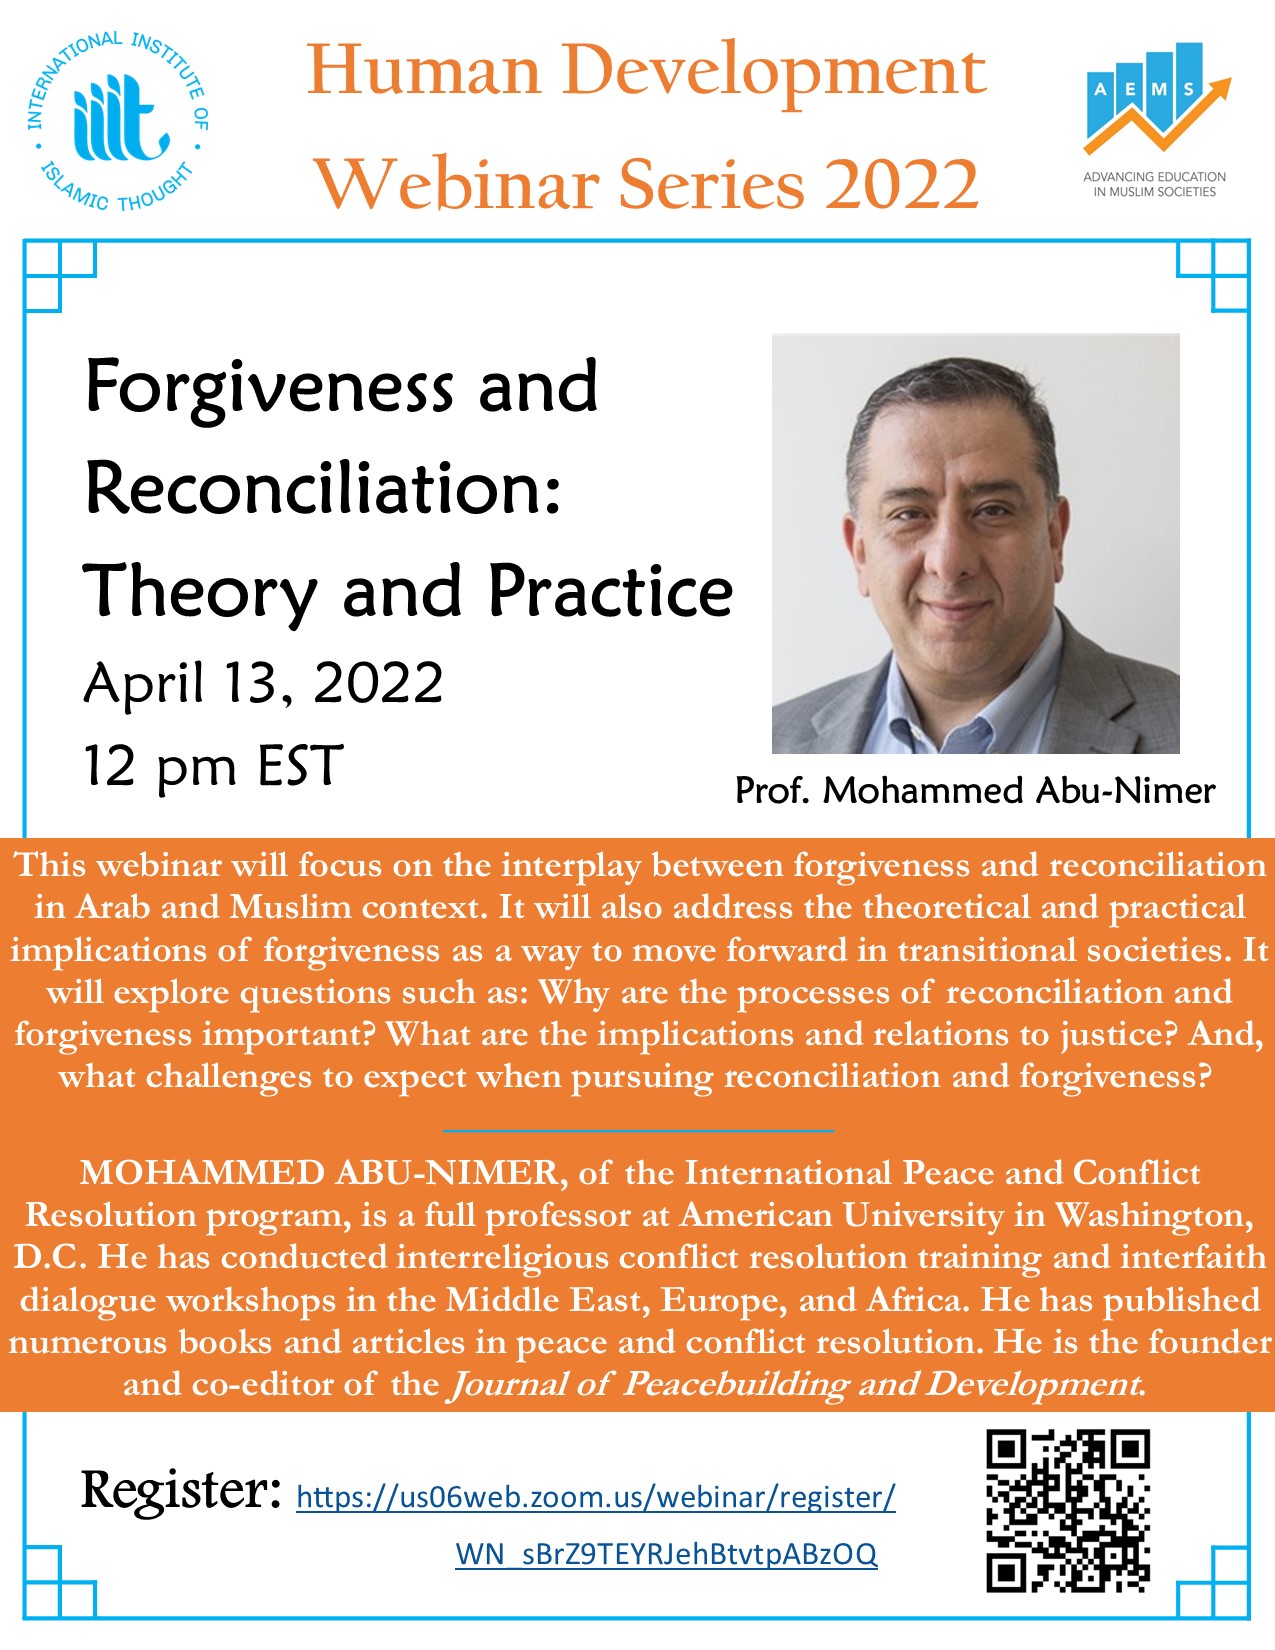 Prof. Mohammed Abu-Nimer on Forgiveness and Reconciliation: Theory and Practice